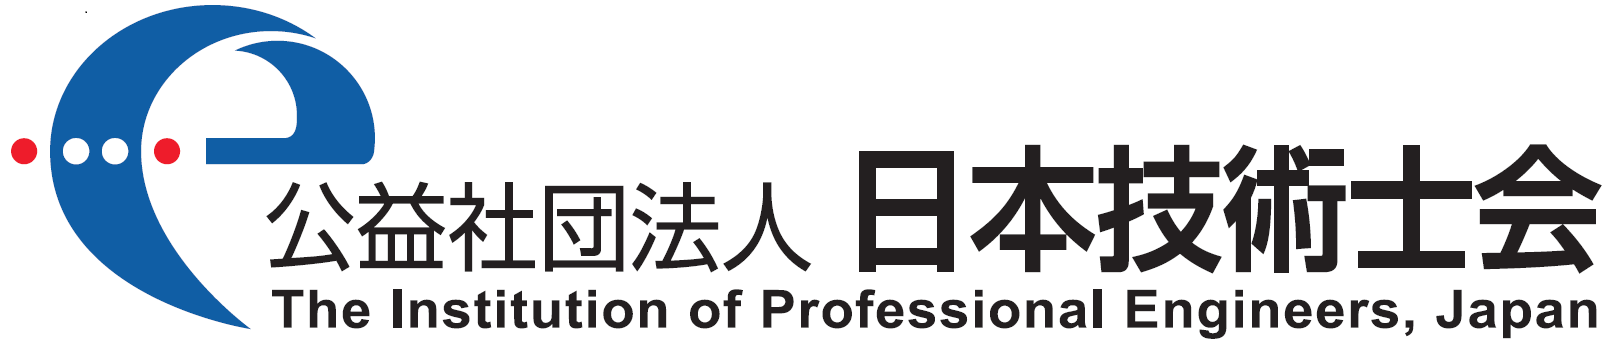 The Institution of Professional engineers, Japan Nuclear & Radiation Division